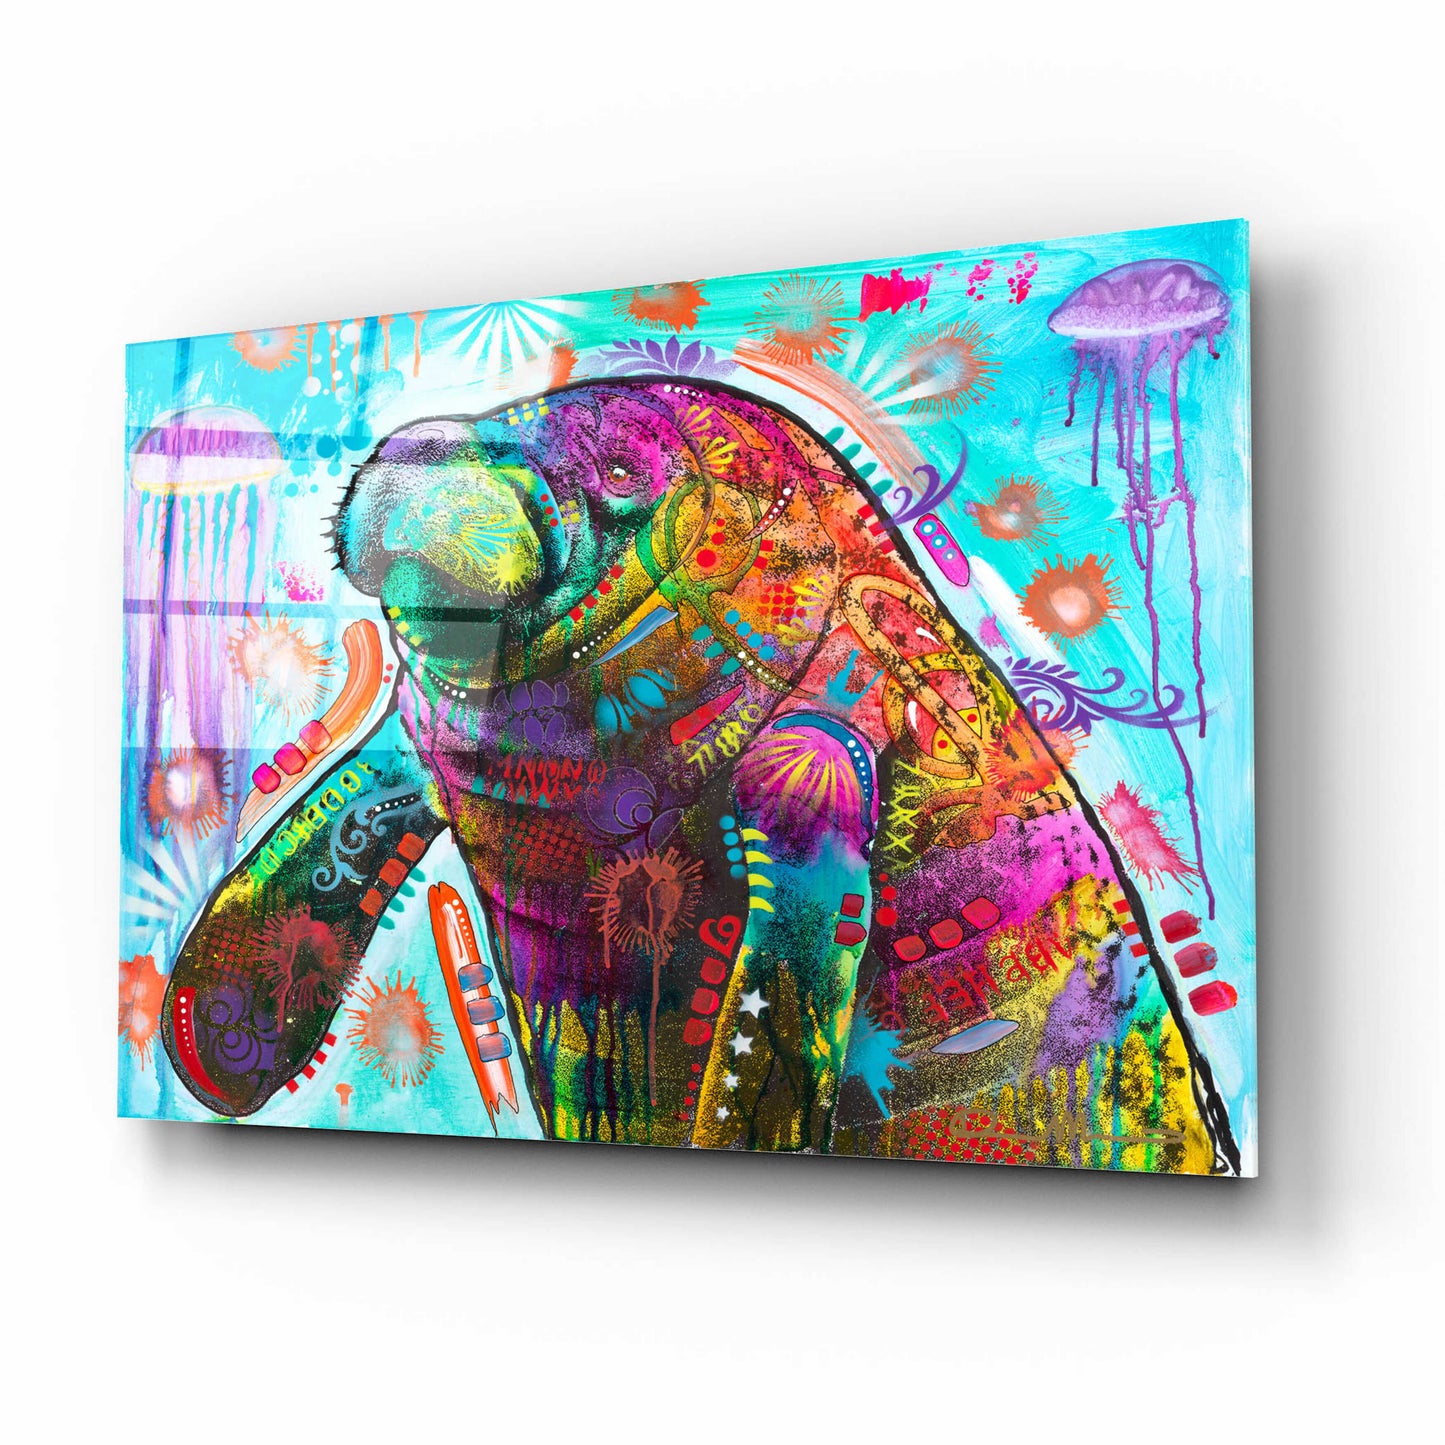 Epic Art 'Manatee' by Dean Russo, Acrylic Glass Wall Art,16x12